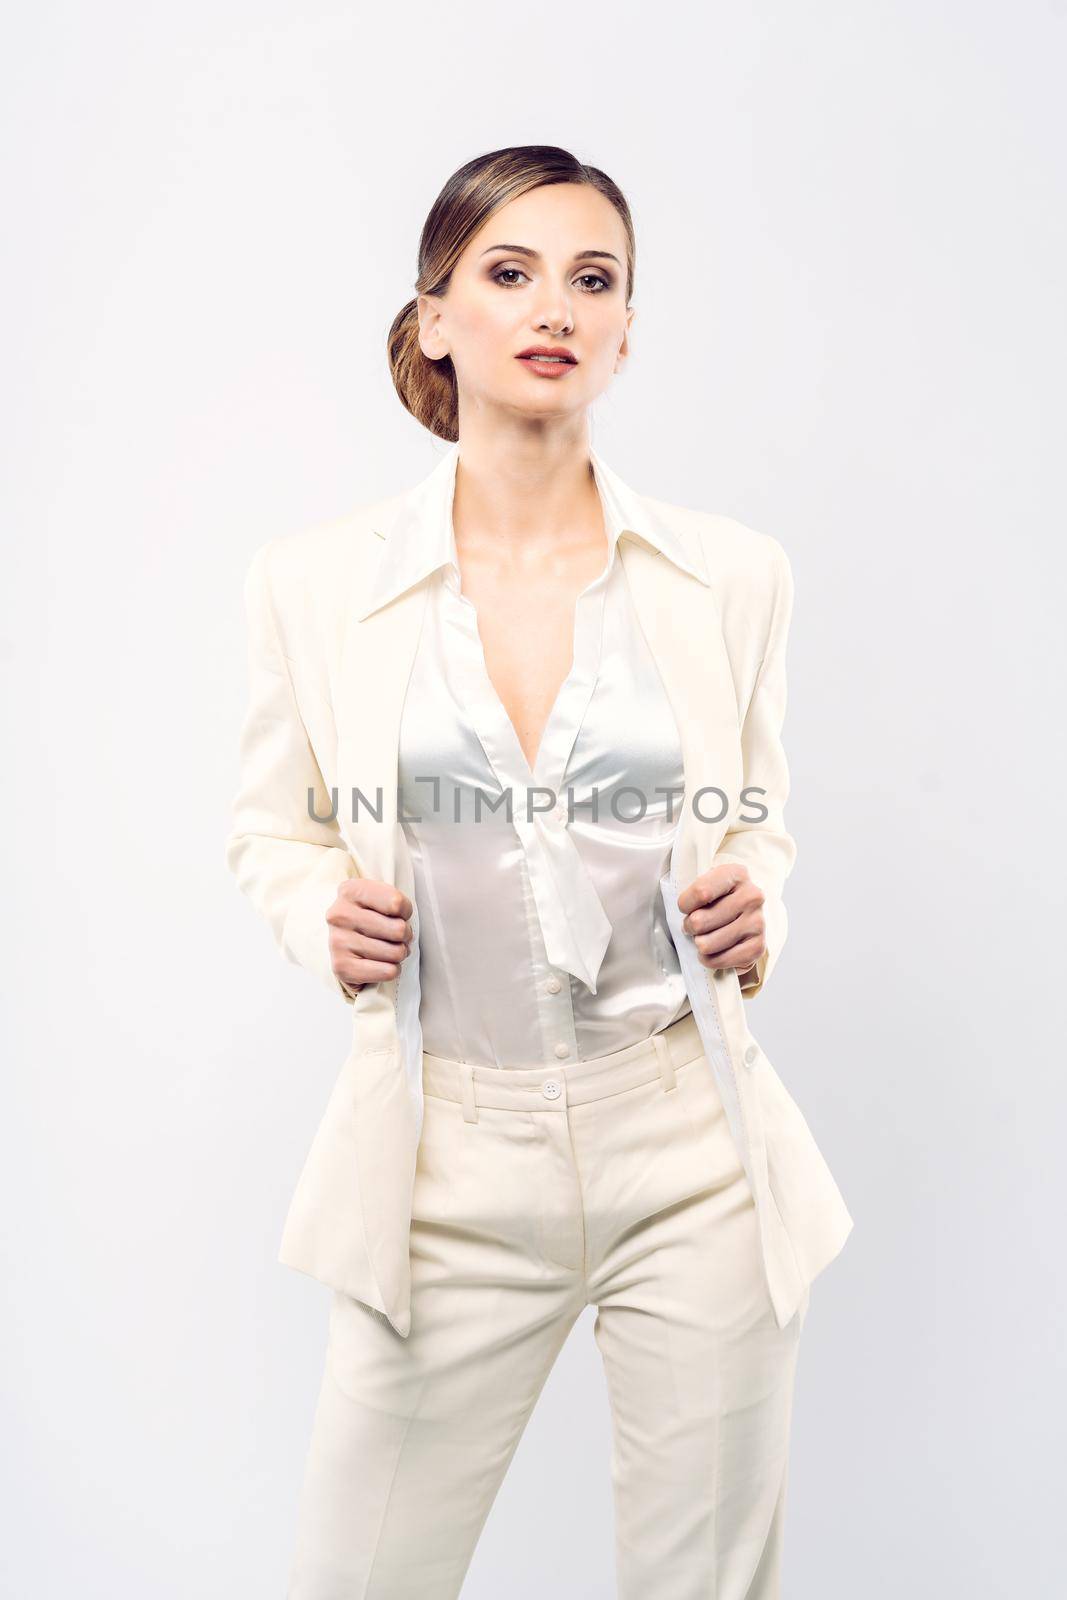 Elegant and fashionable business woman in a white suit by Kzenon